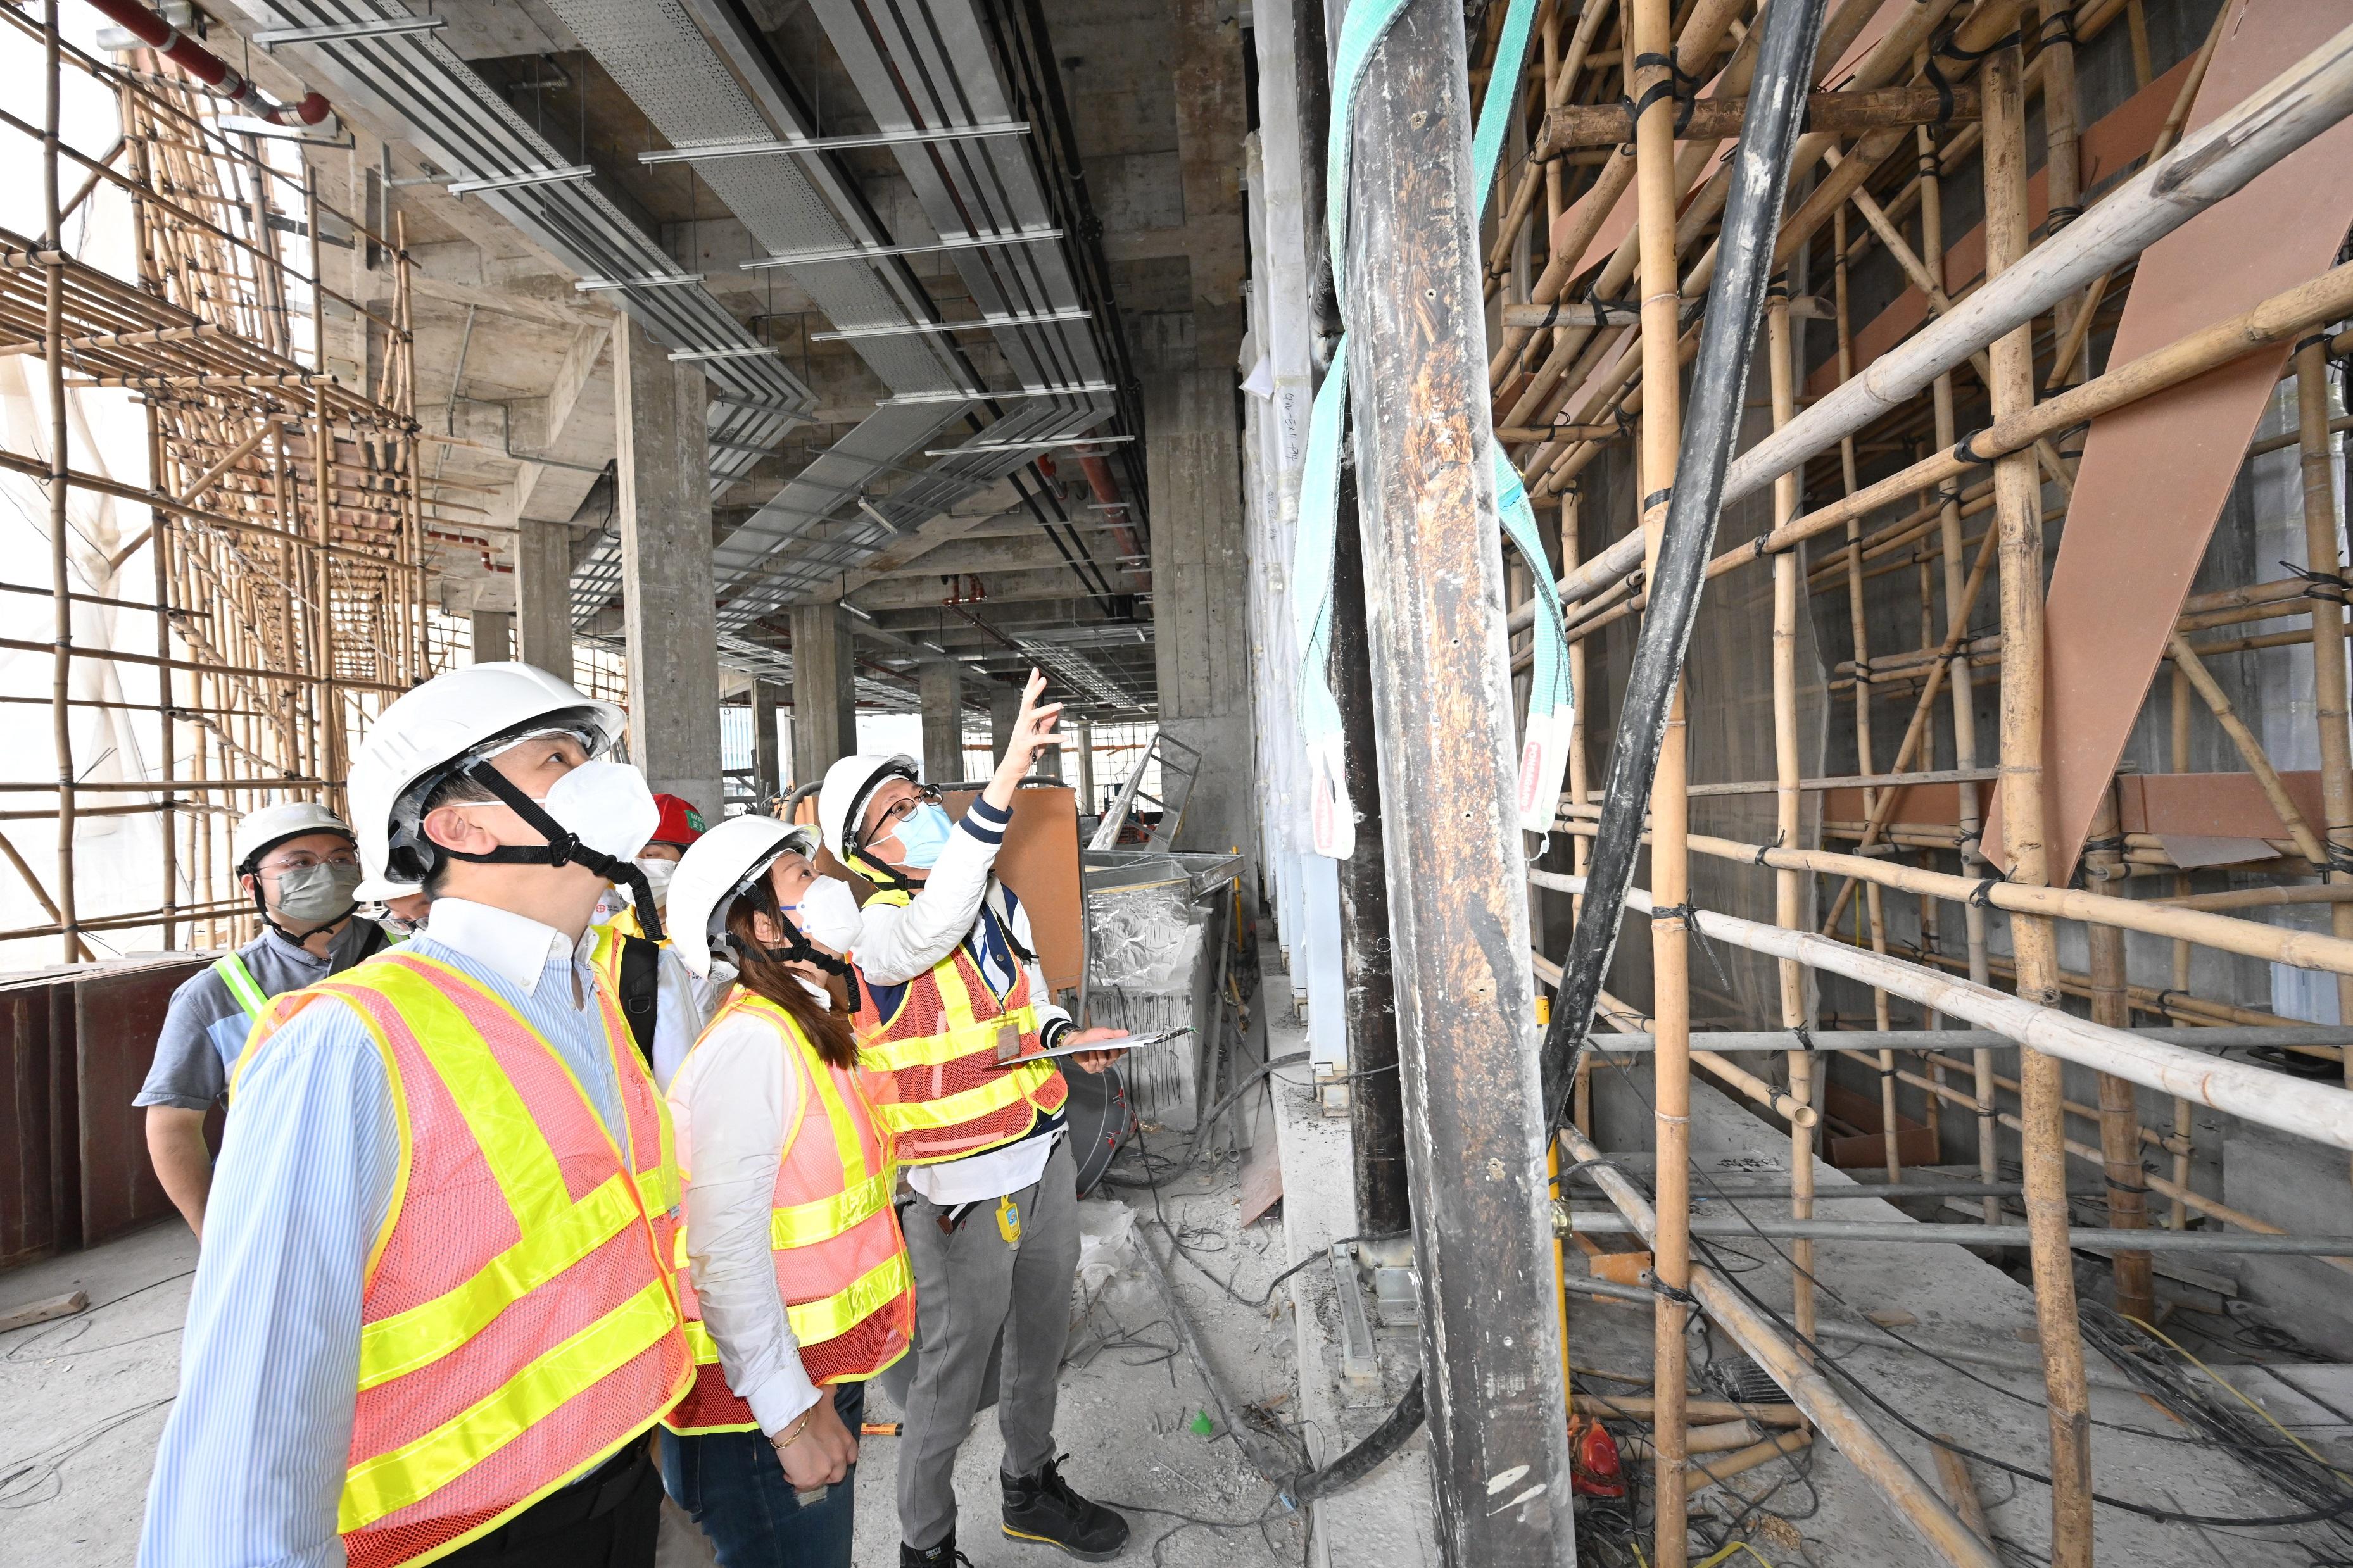 The Labour Department concluded a special enforcement operation targeting construction sites of new works and work-at-height safety to curb unsafe work practices on construction sites in November. Photo shows the Commissioner for Labour, Ms May Chan (second right), and the Deputy Commissioner for Labour (Occupational Safety and Health), Mr Vincent Fung (first left), inspecting a construction site.